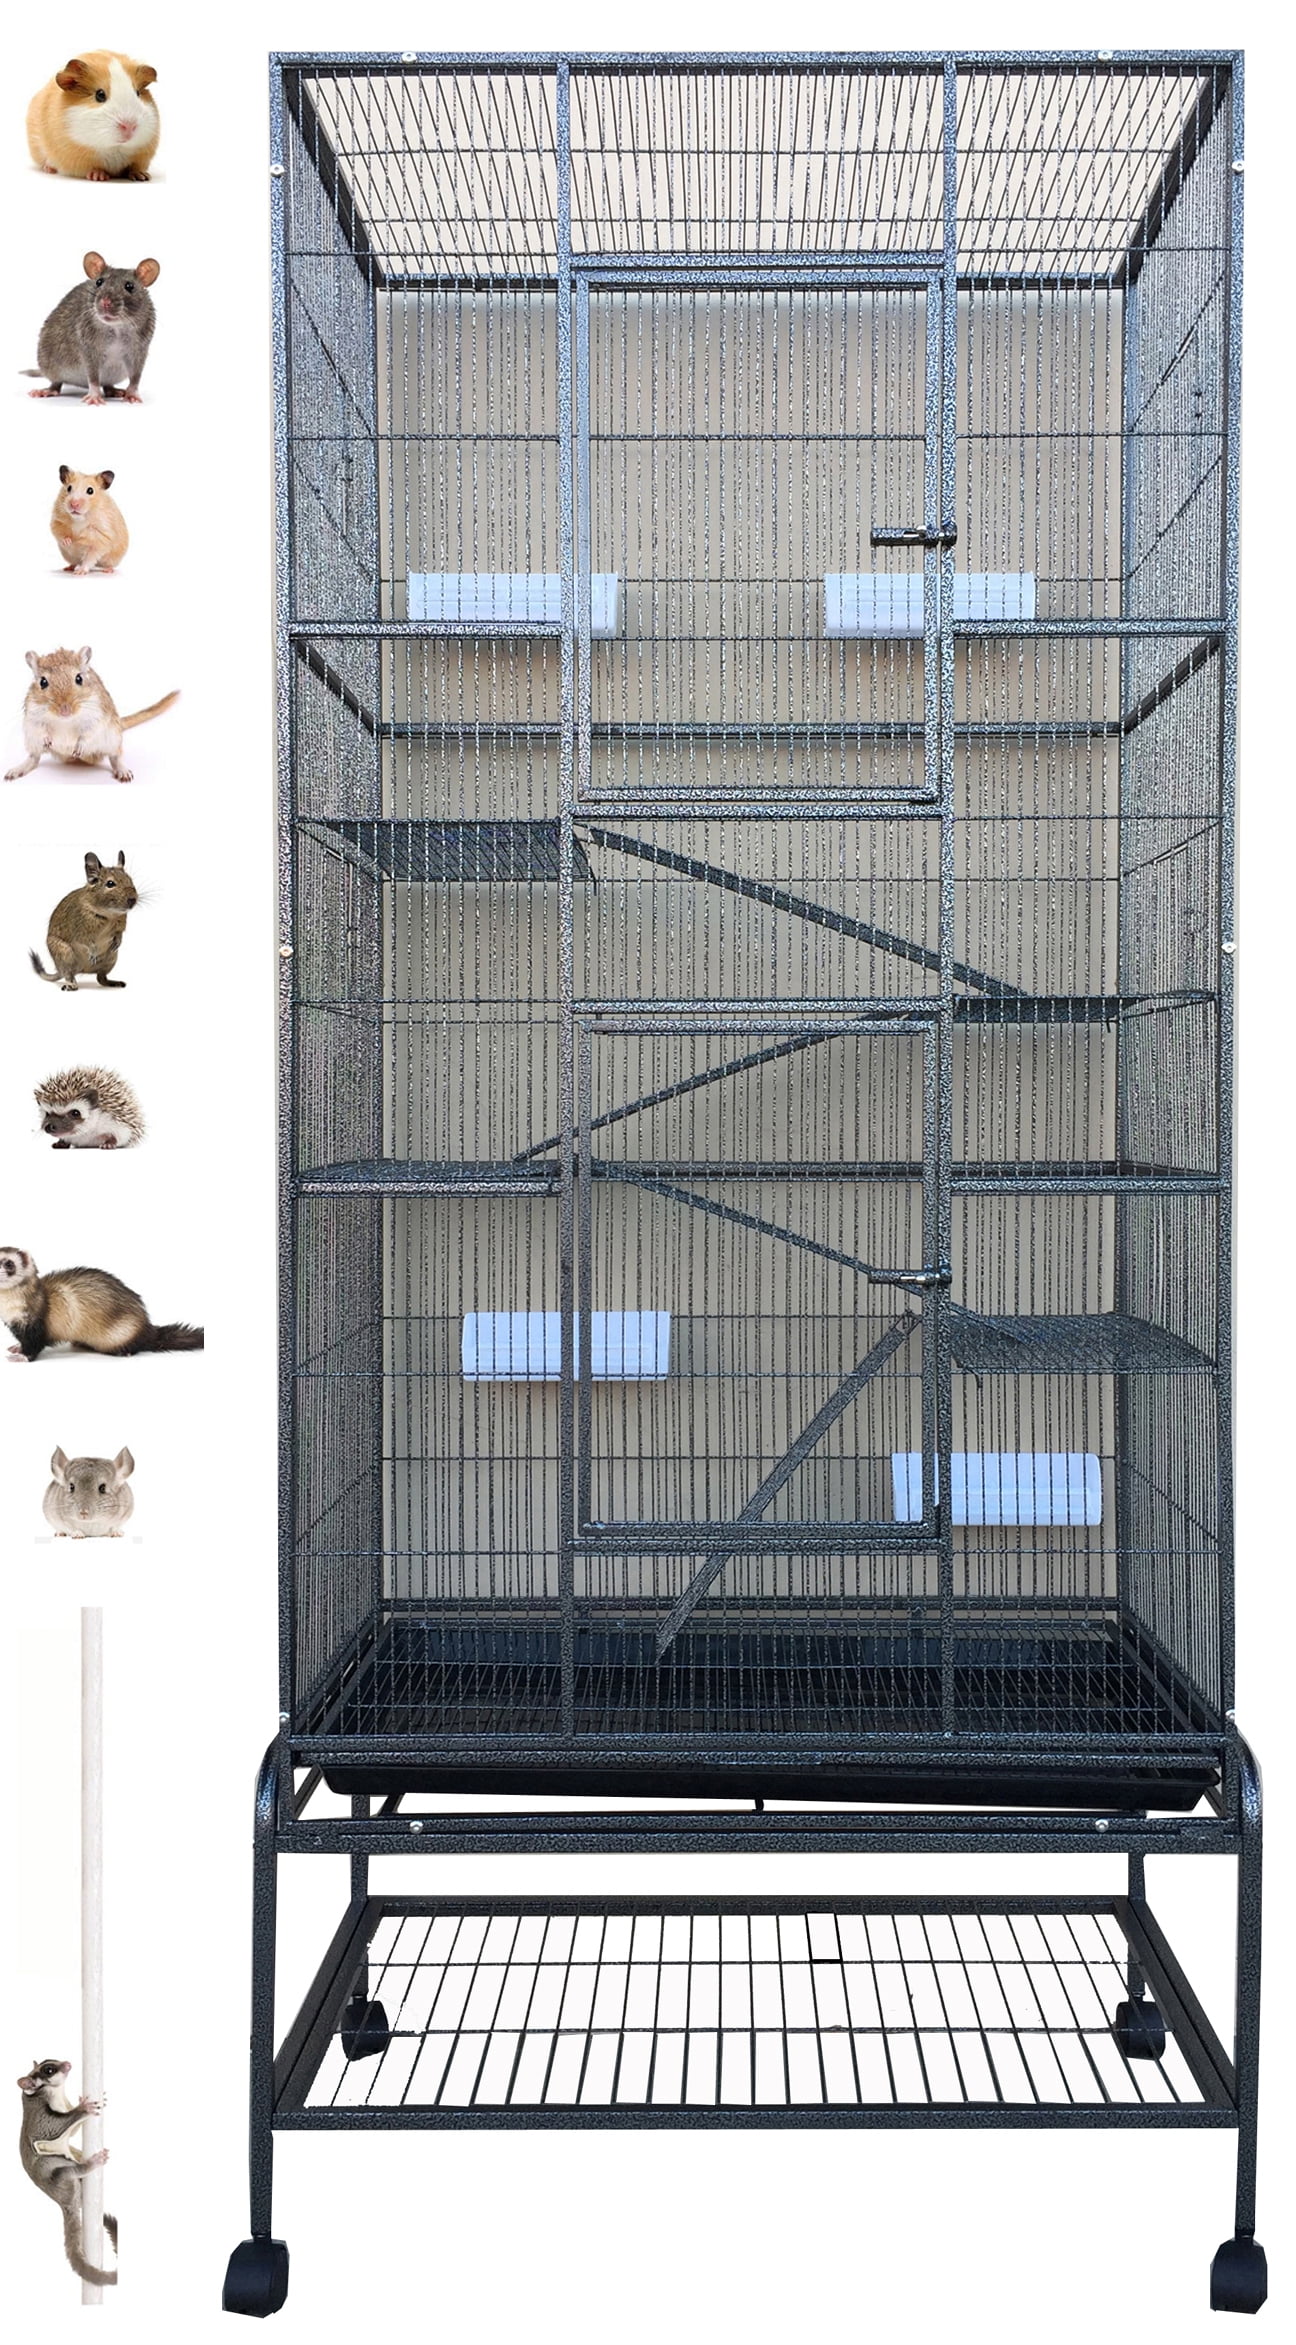 Extra Large 5-Tiers Small Animal Critter House Habitat Cage With Narrow 1/2-inch Wire Spacing for Guinea Pig Ferret Chinchilla Sugar Glider Rats Hamster Hedgehog Gerbil